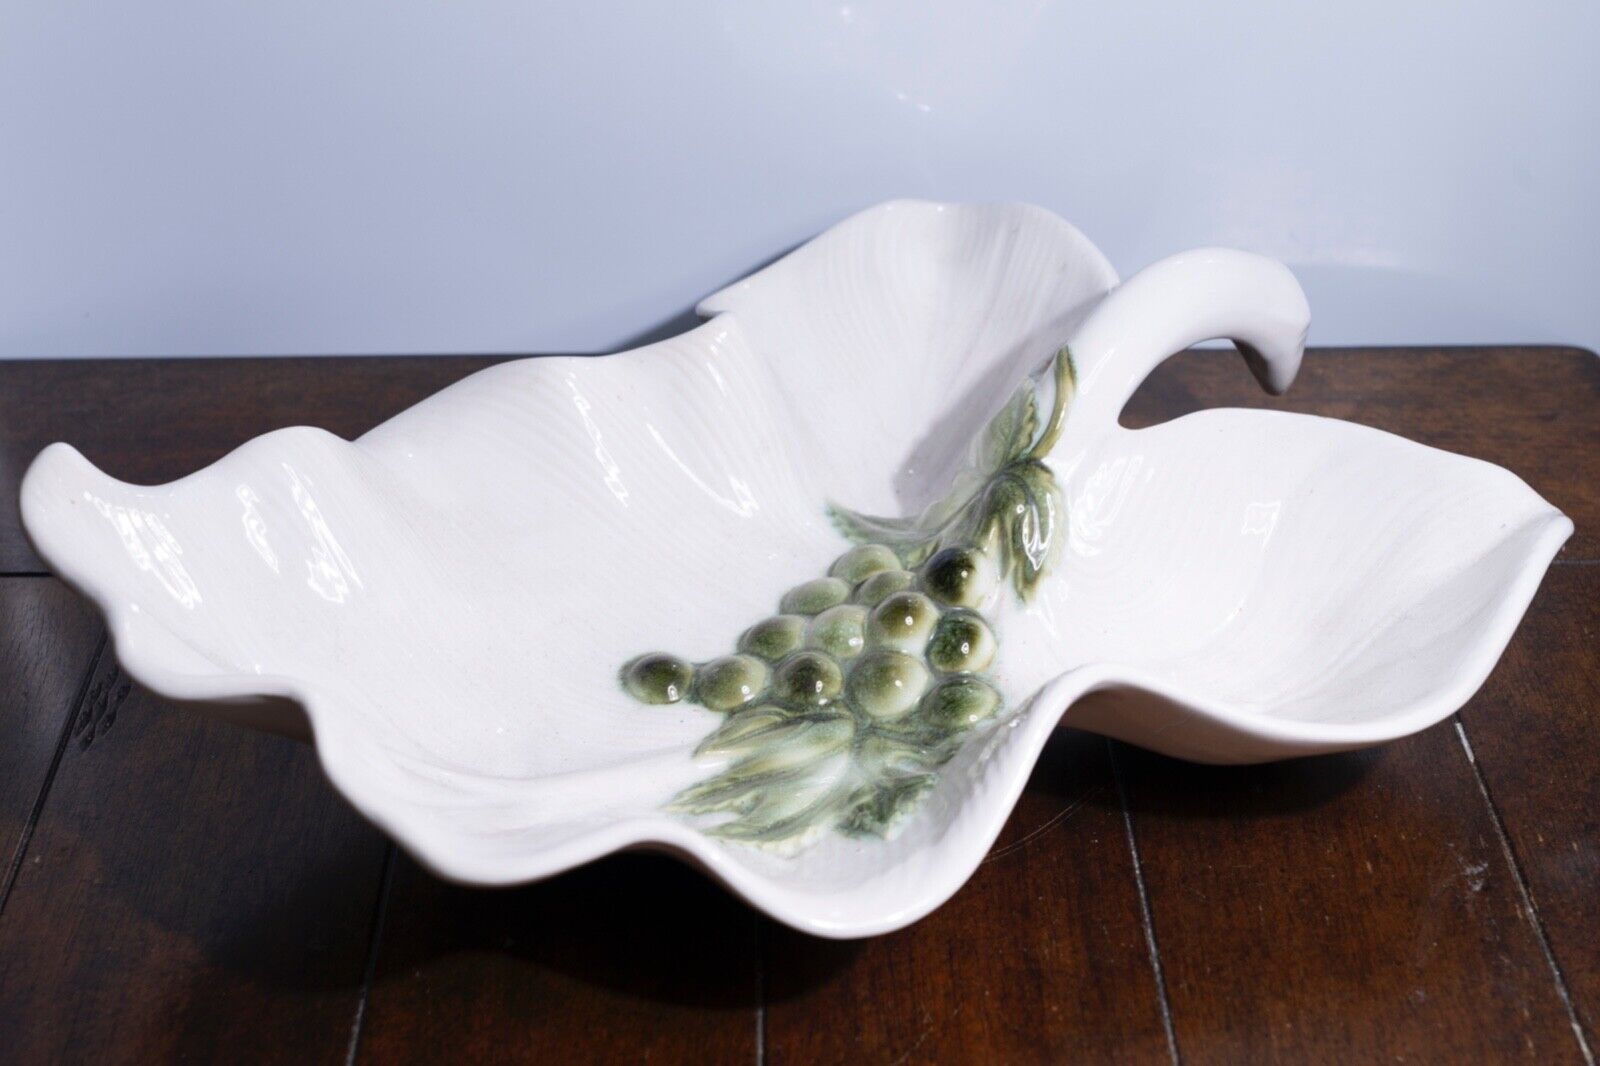 Vintage HULL Pottery Leaf Shaped Serving Dish with Green Grape Accents, U.S.A.